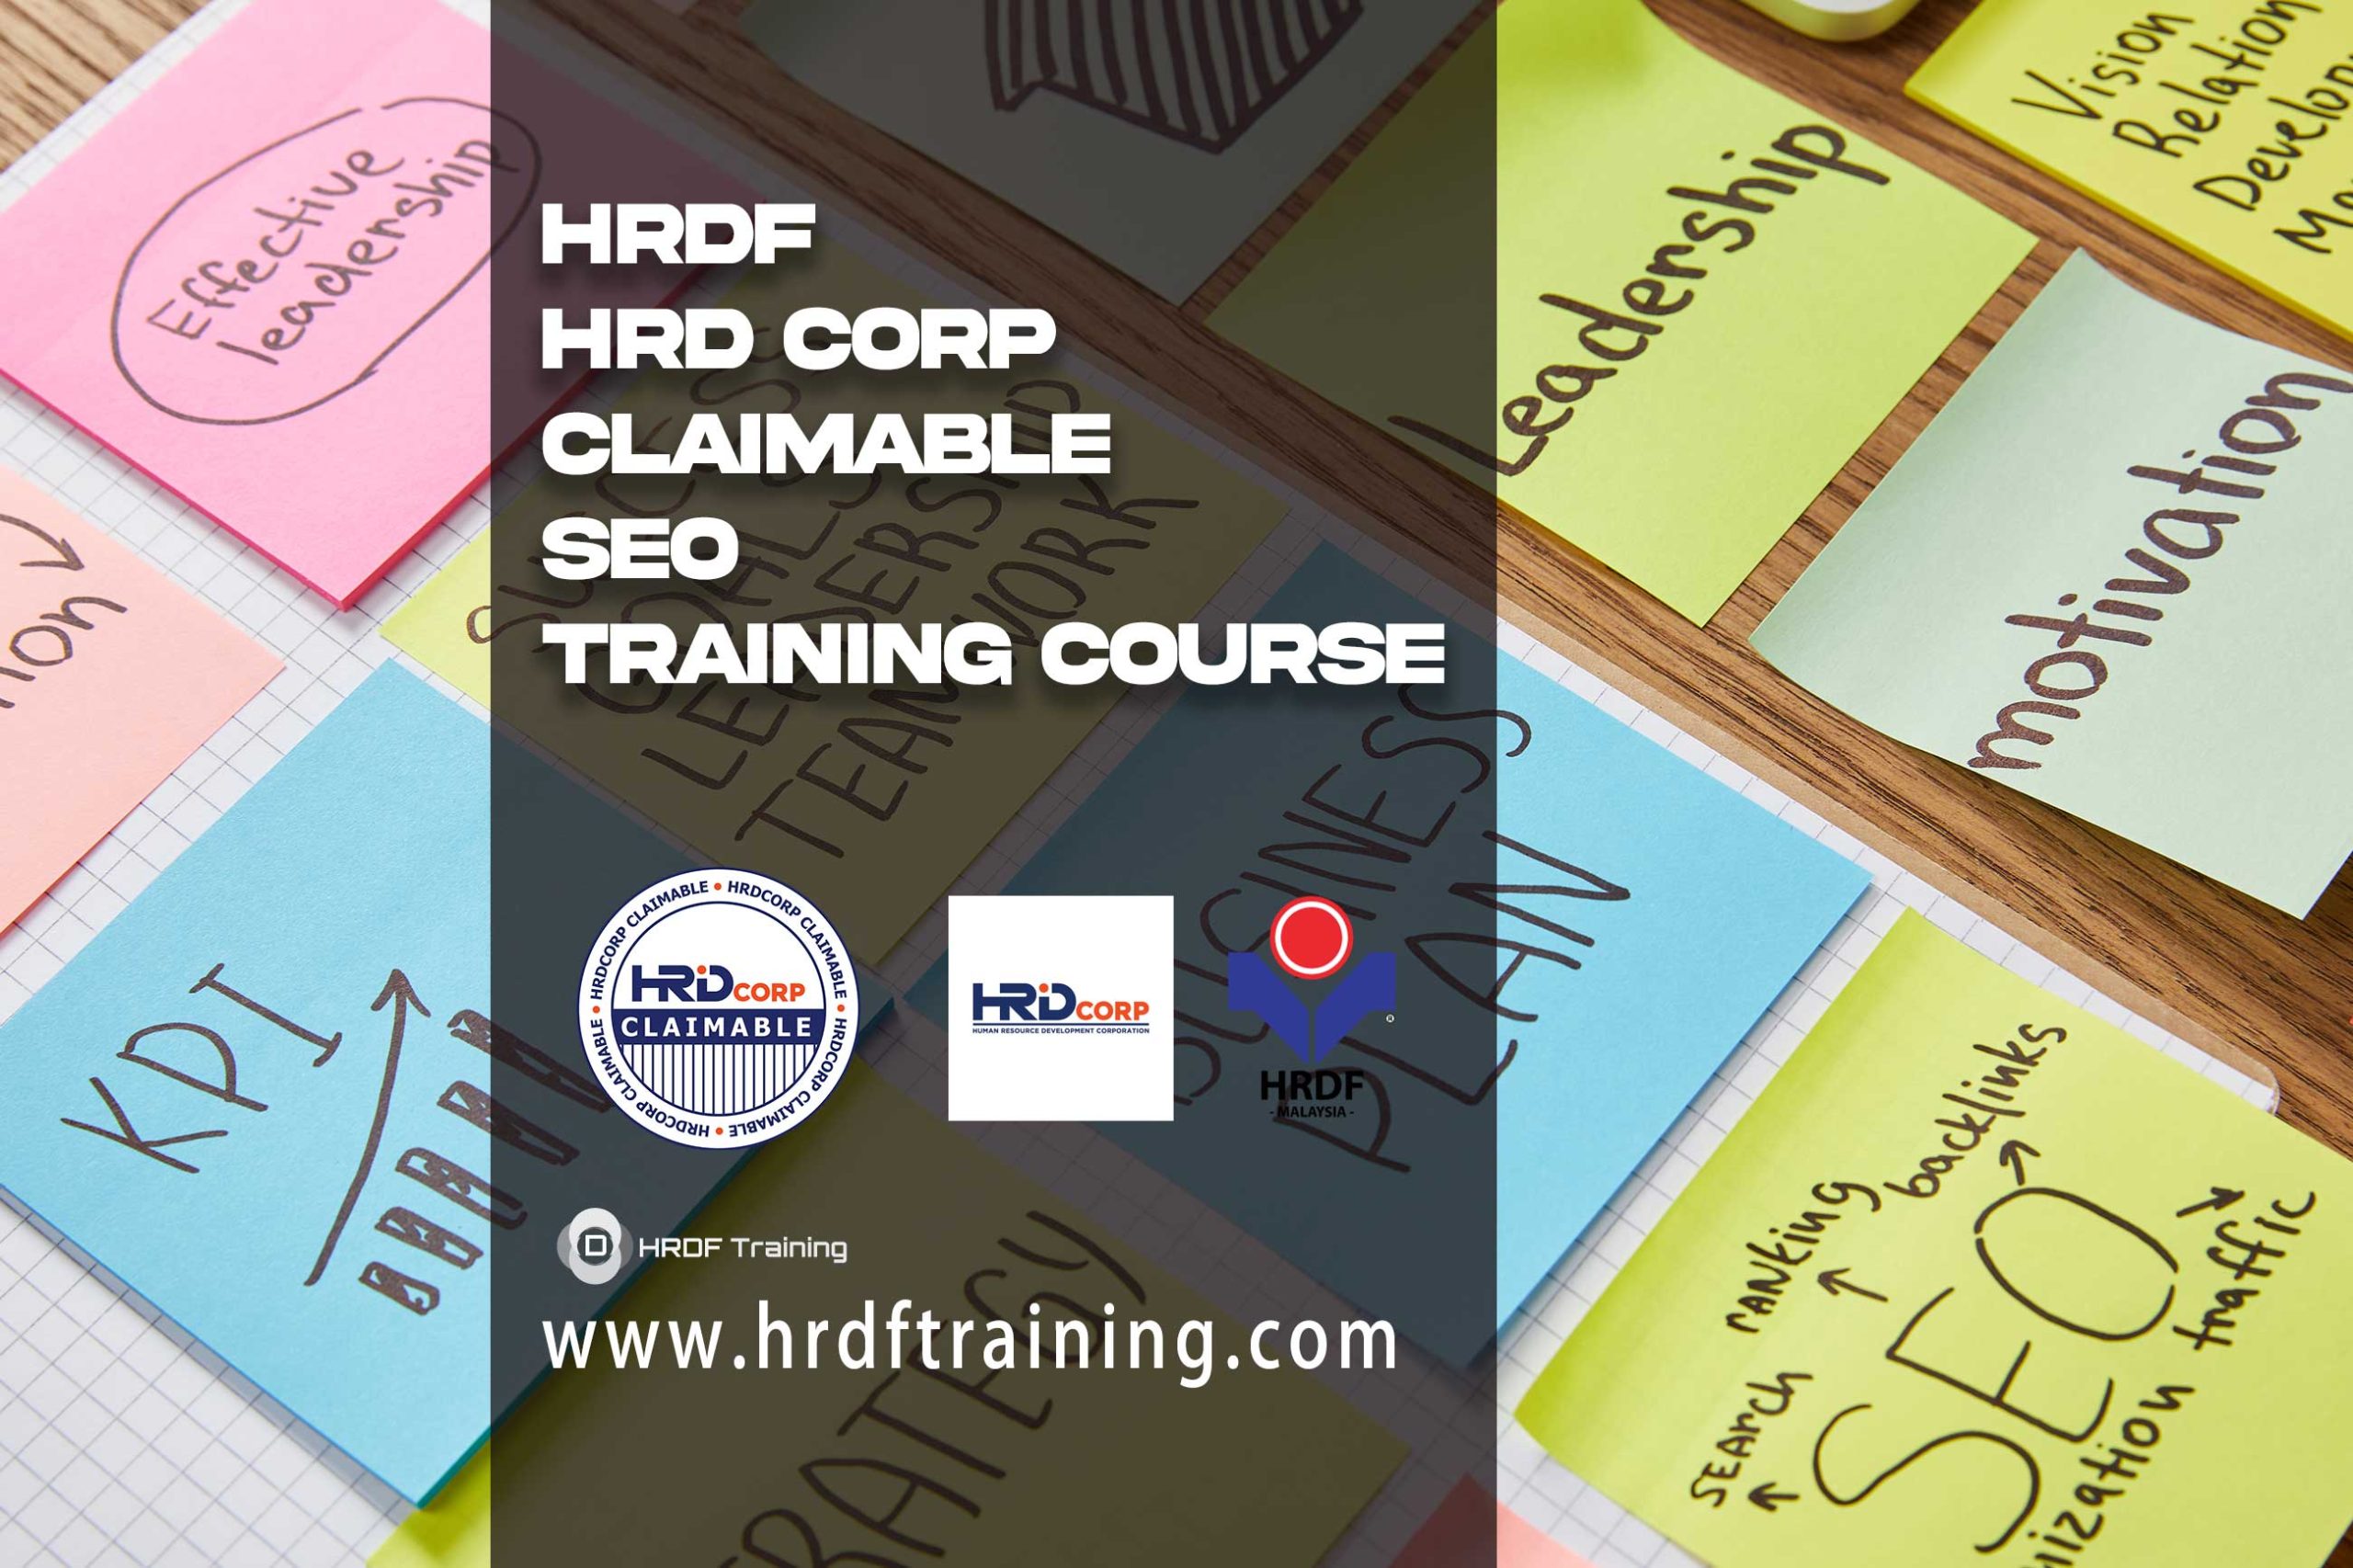 HRD-Corp-Claimable-SEO-Training-Course